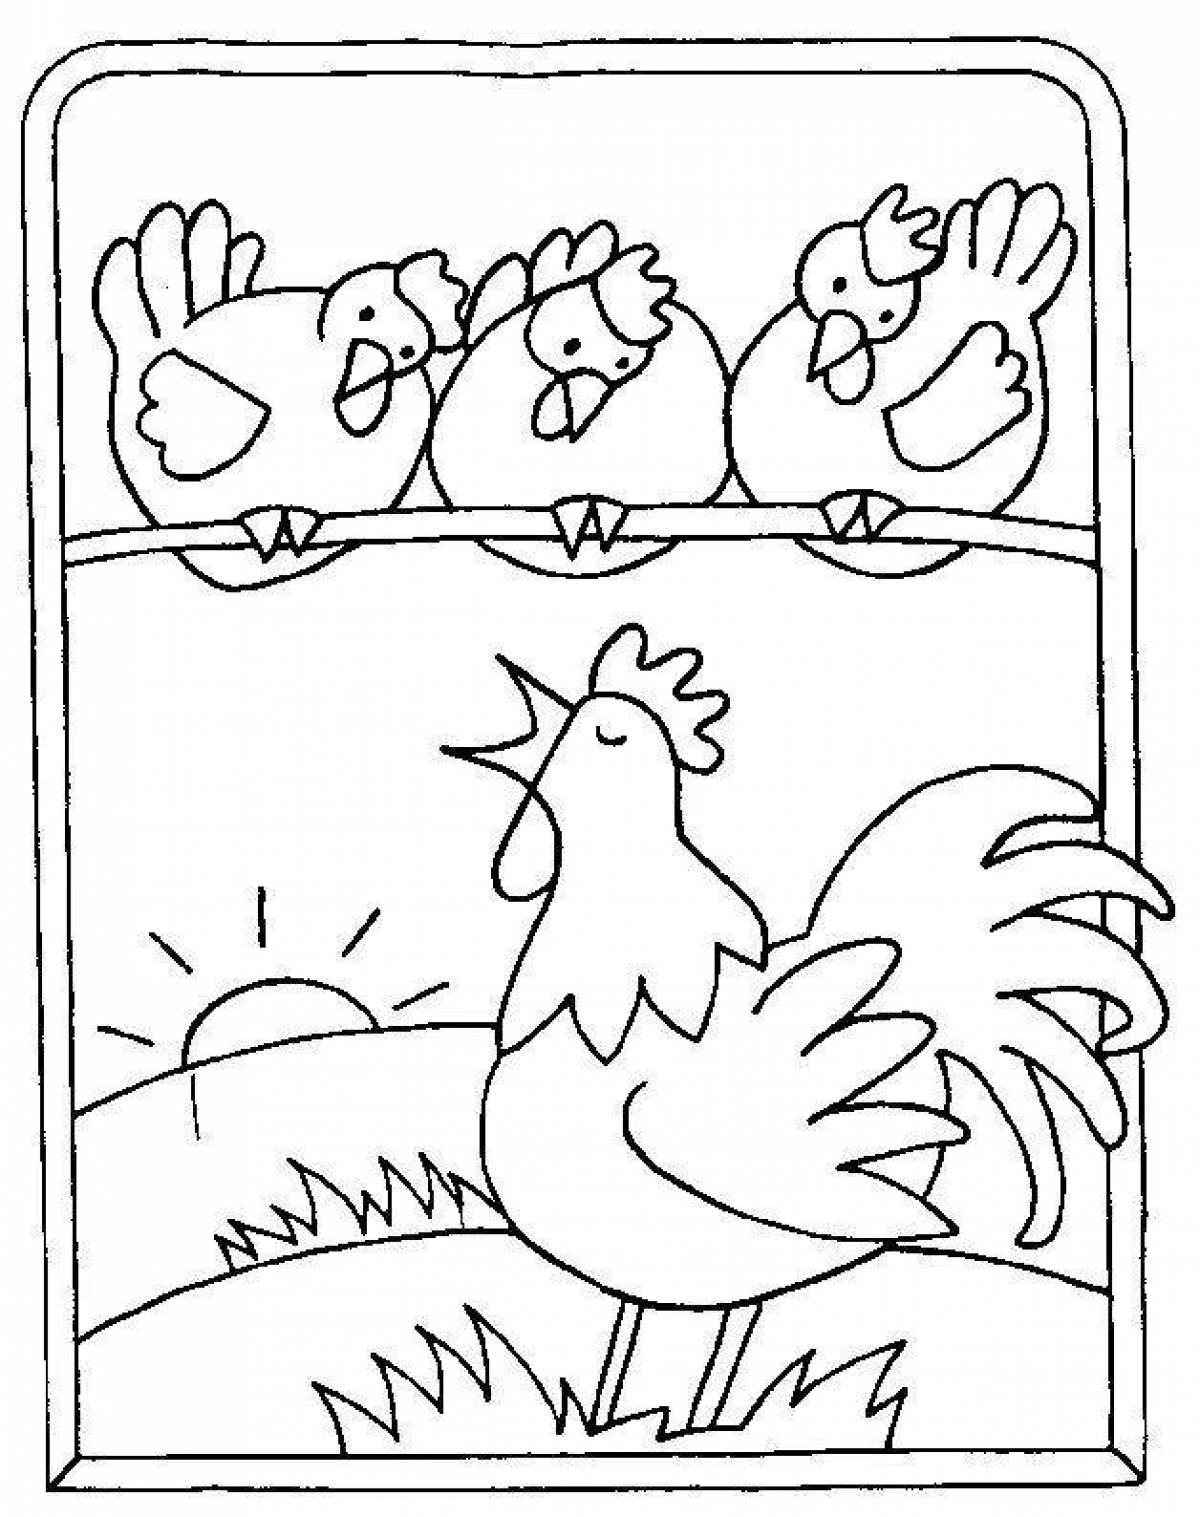 Coloring page nice chickens